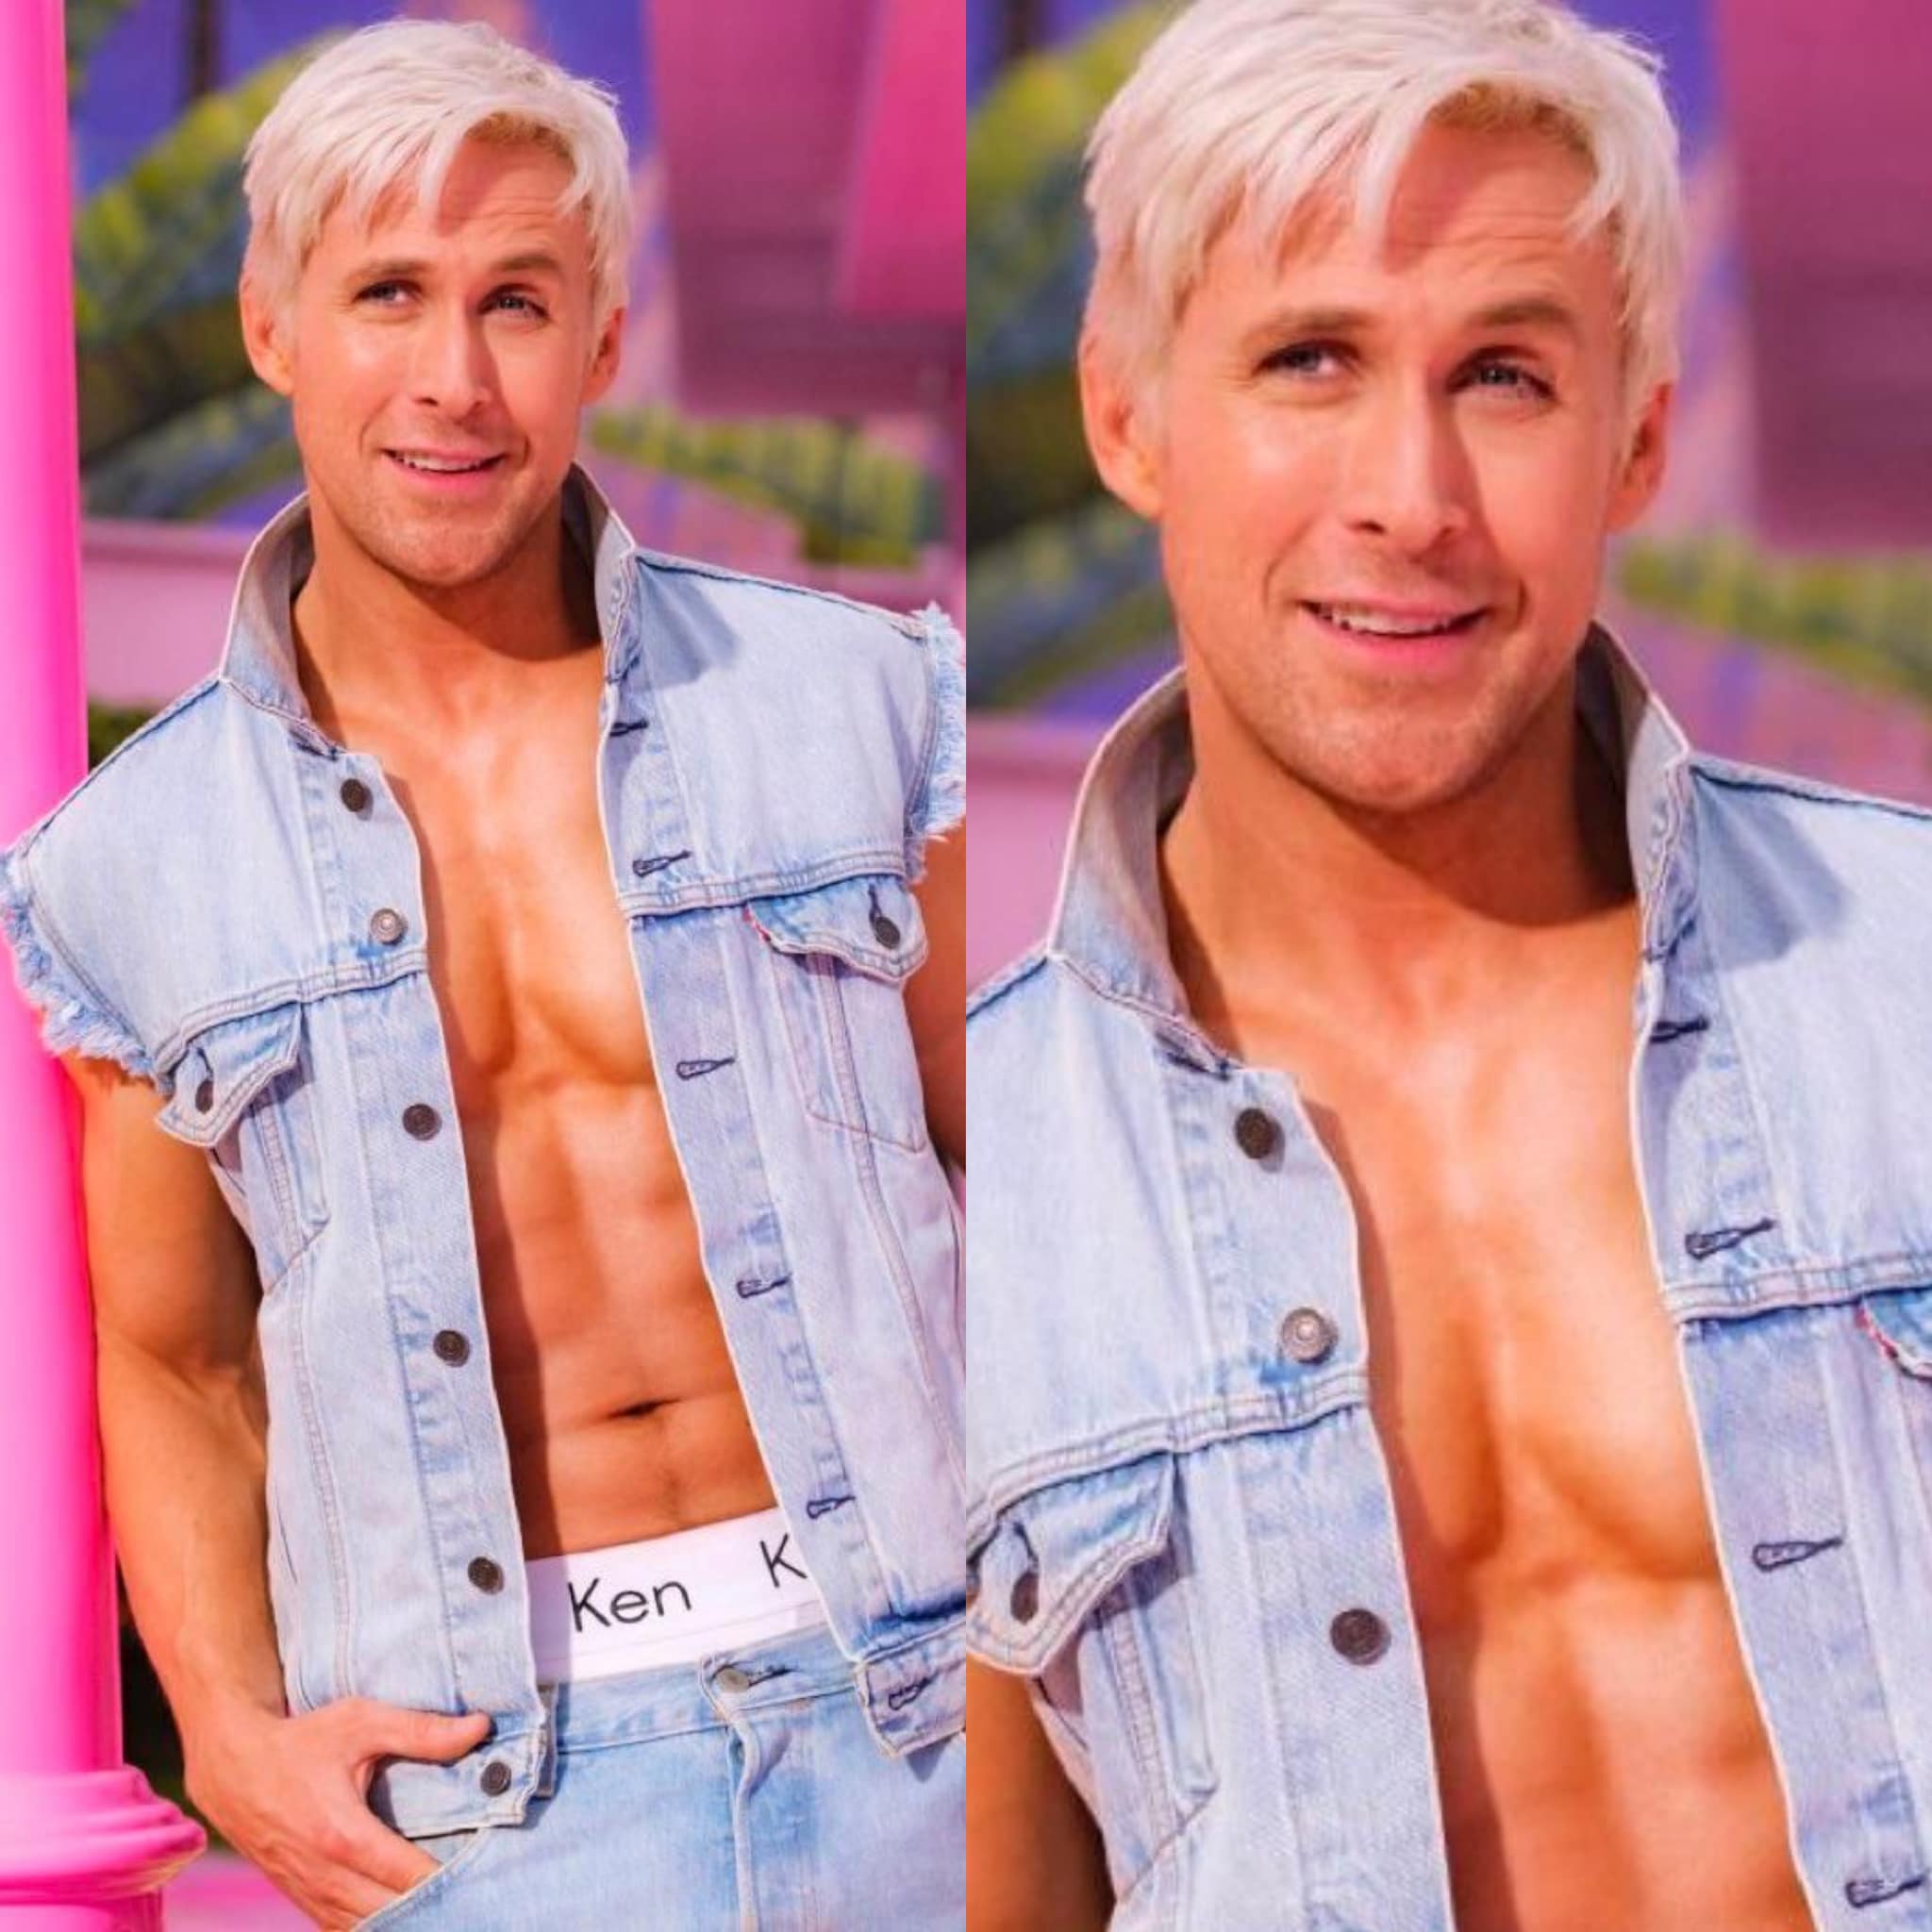 Ryan Gosling's First Look As Ken From Barbie Revealed; Film To Hit Theatres In July 2023